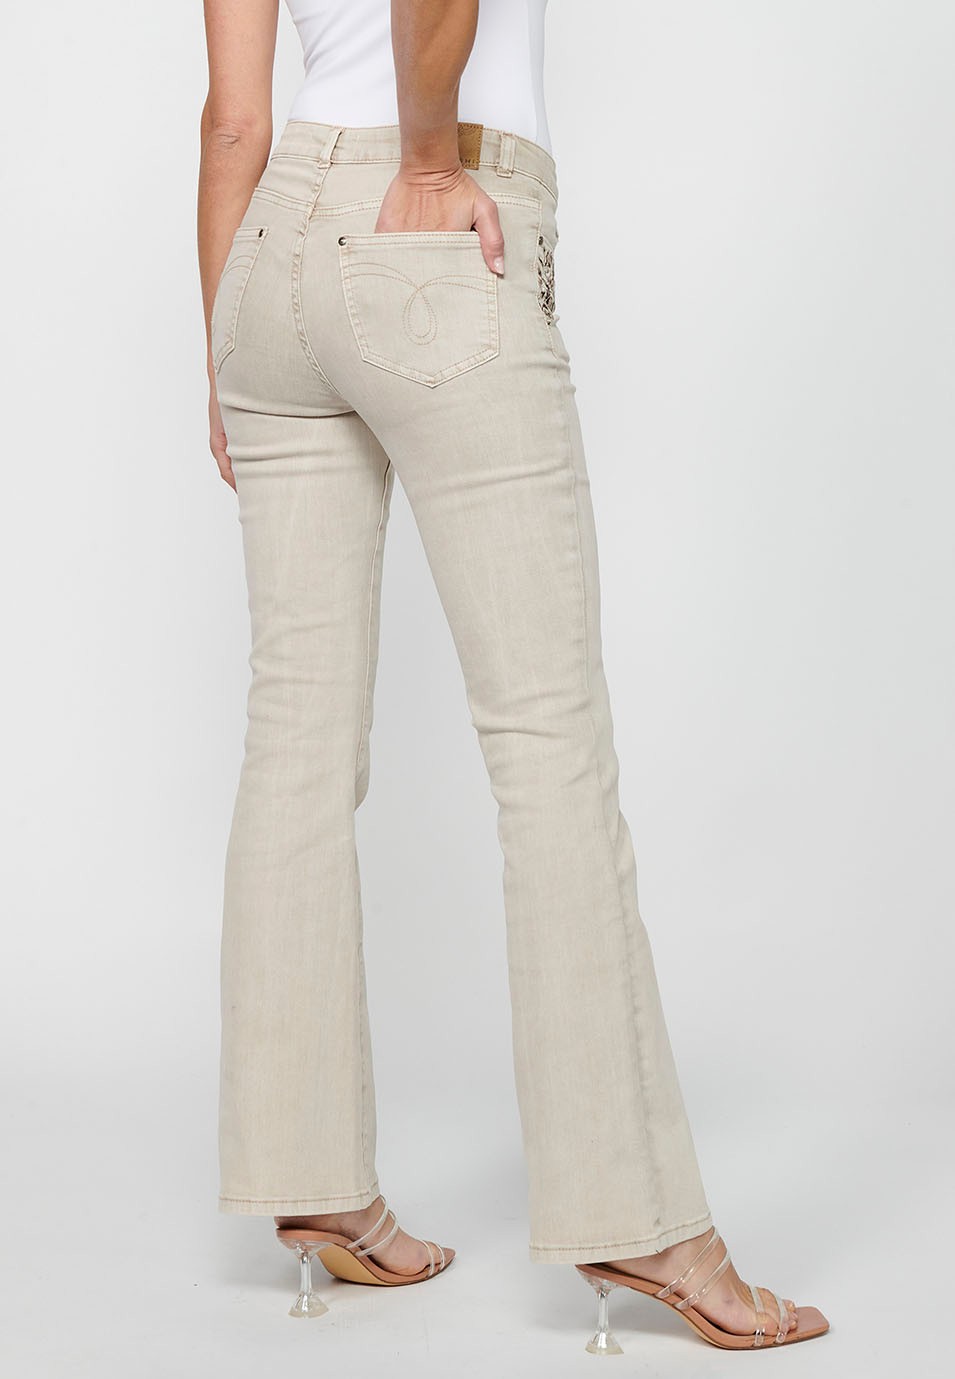 Long bell bottom pants with front zipper closure in Beige for Women 5